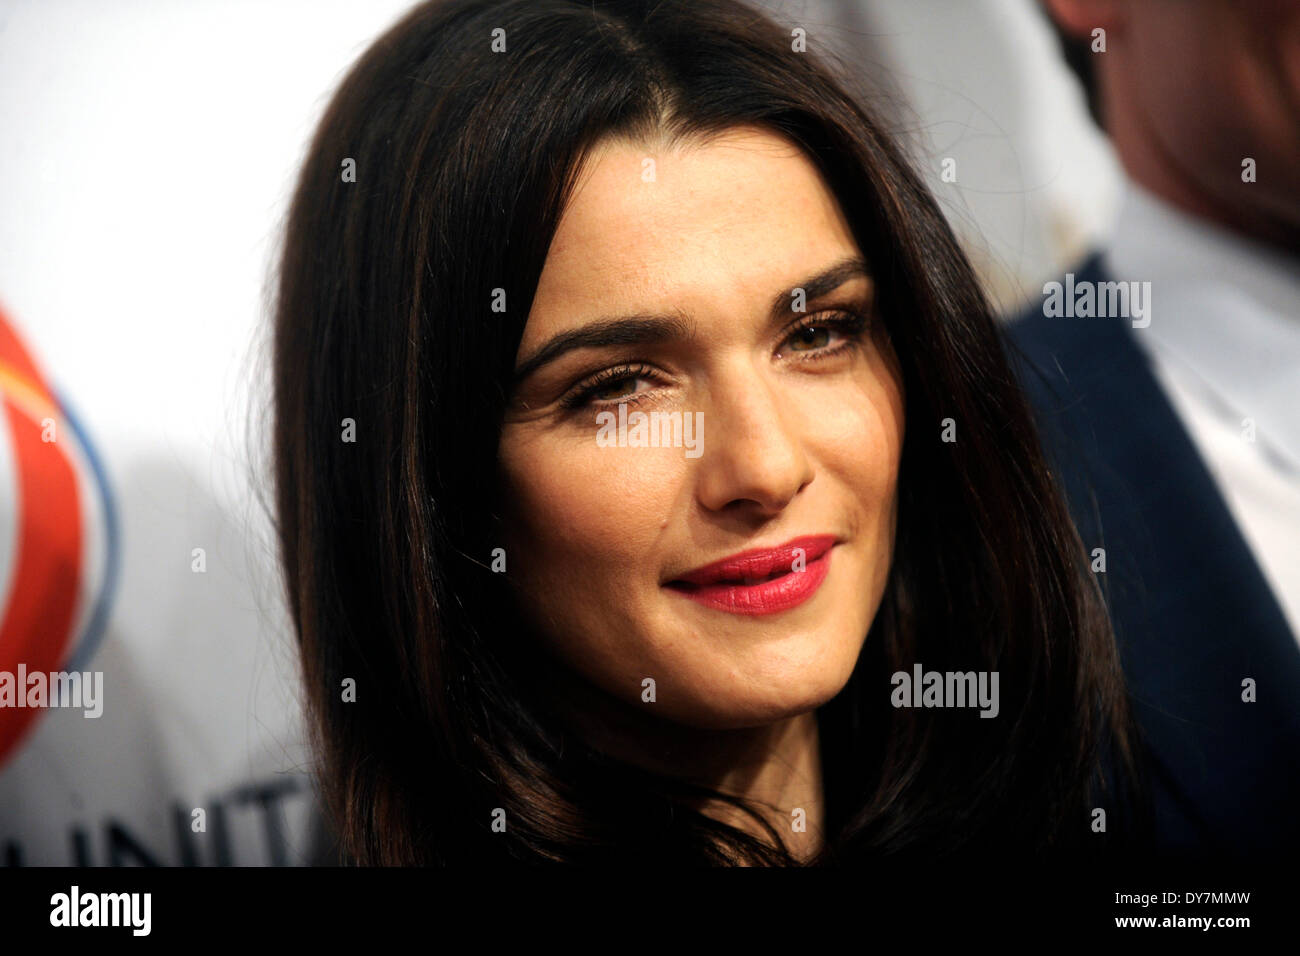 Rachel Weisz attends The Opportunity Networks 7th Annual Night of Opportunity at Cipriani Wall Street on April 7, 2014 in New York City Stock Photo